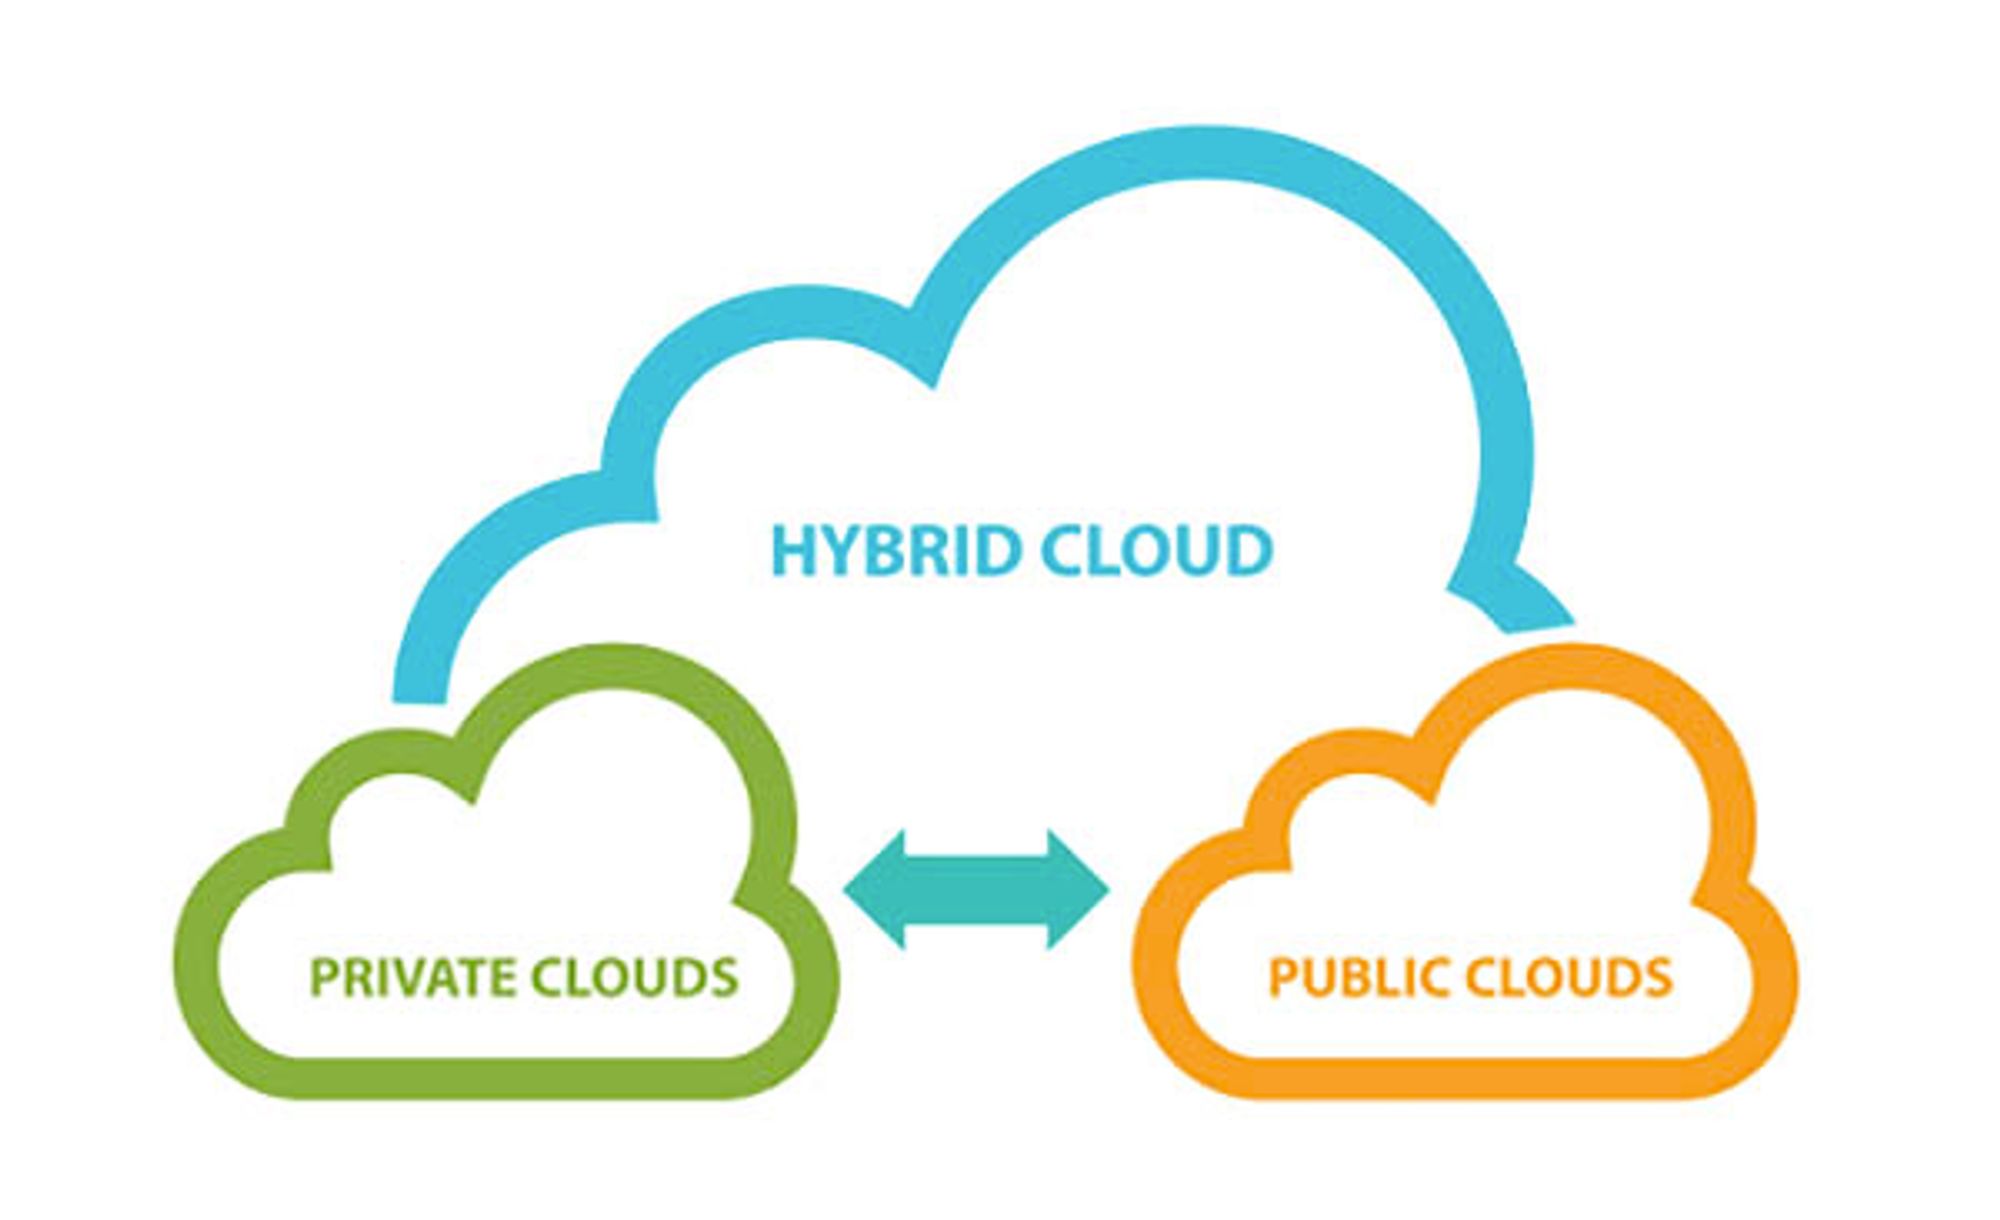 The three main types of clouds are public, private, and hybrid.